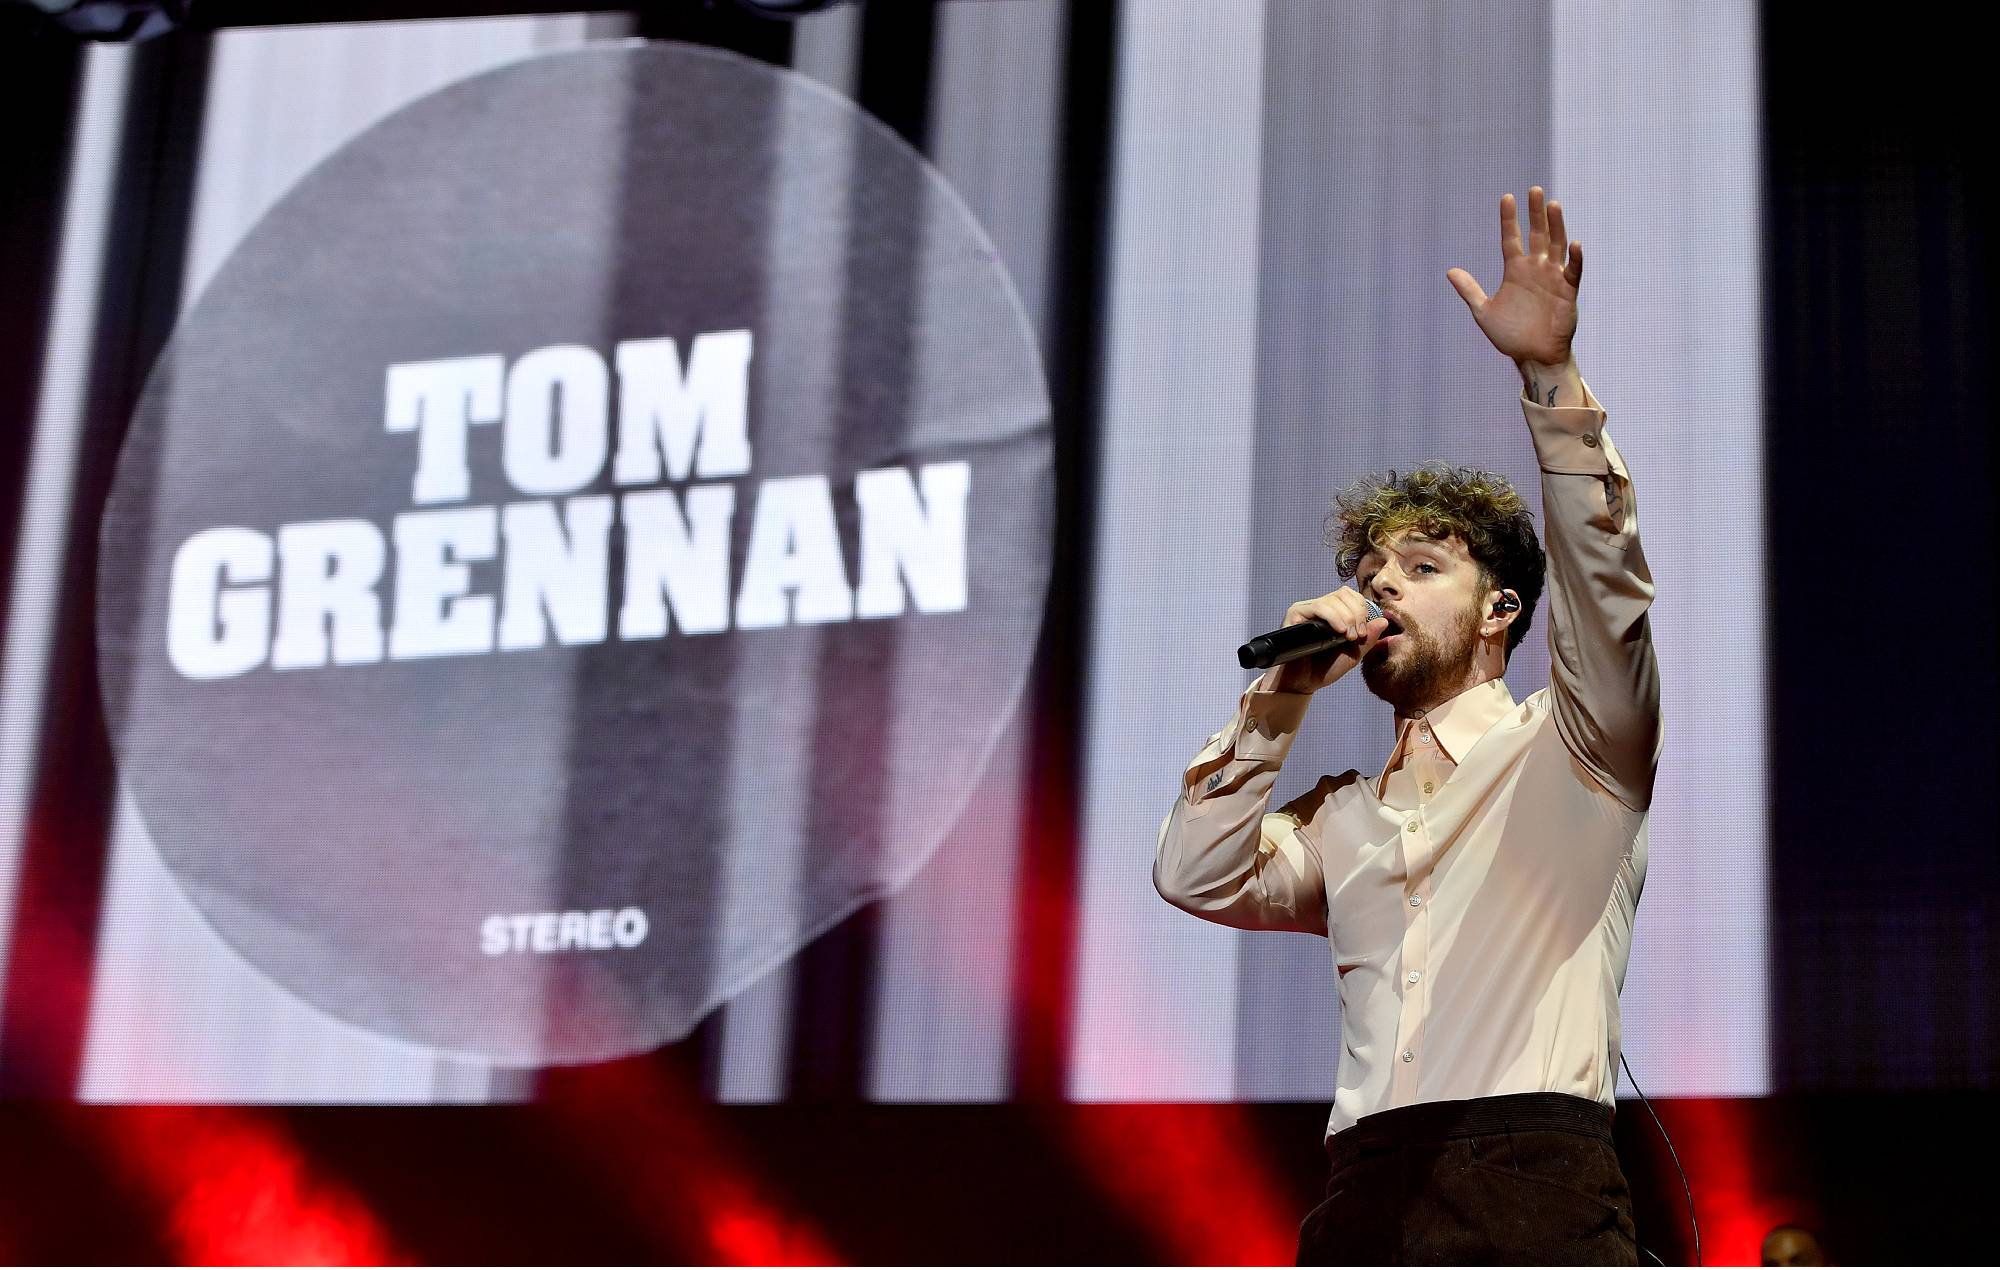 Tom Grennan on his US attack and “different chapter” of a new album